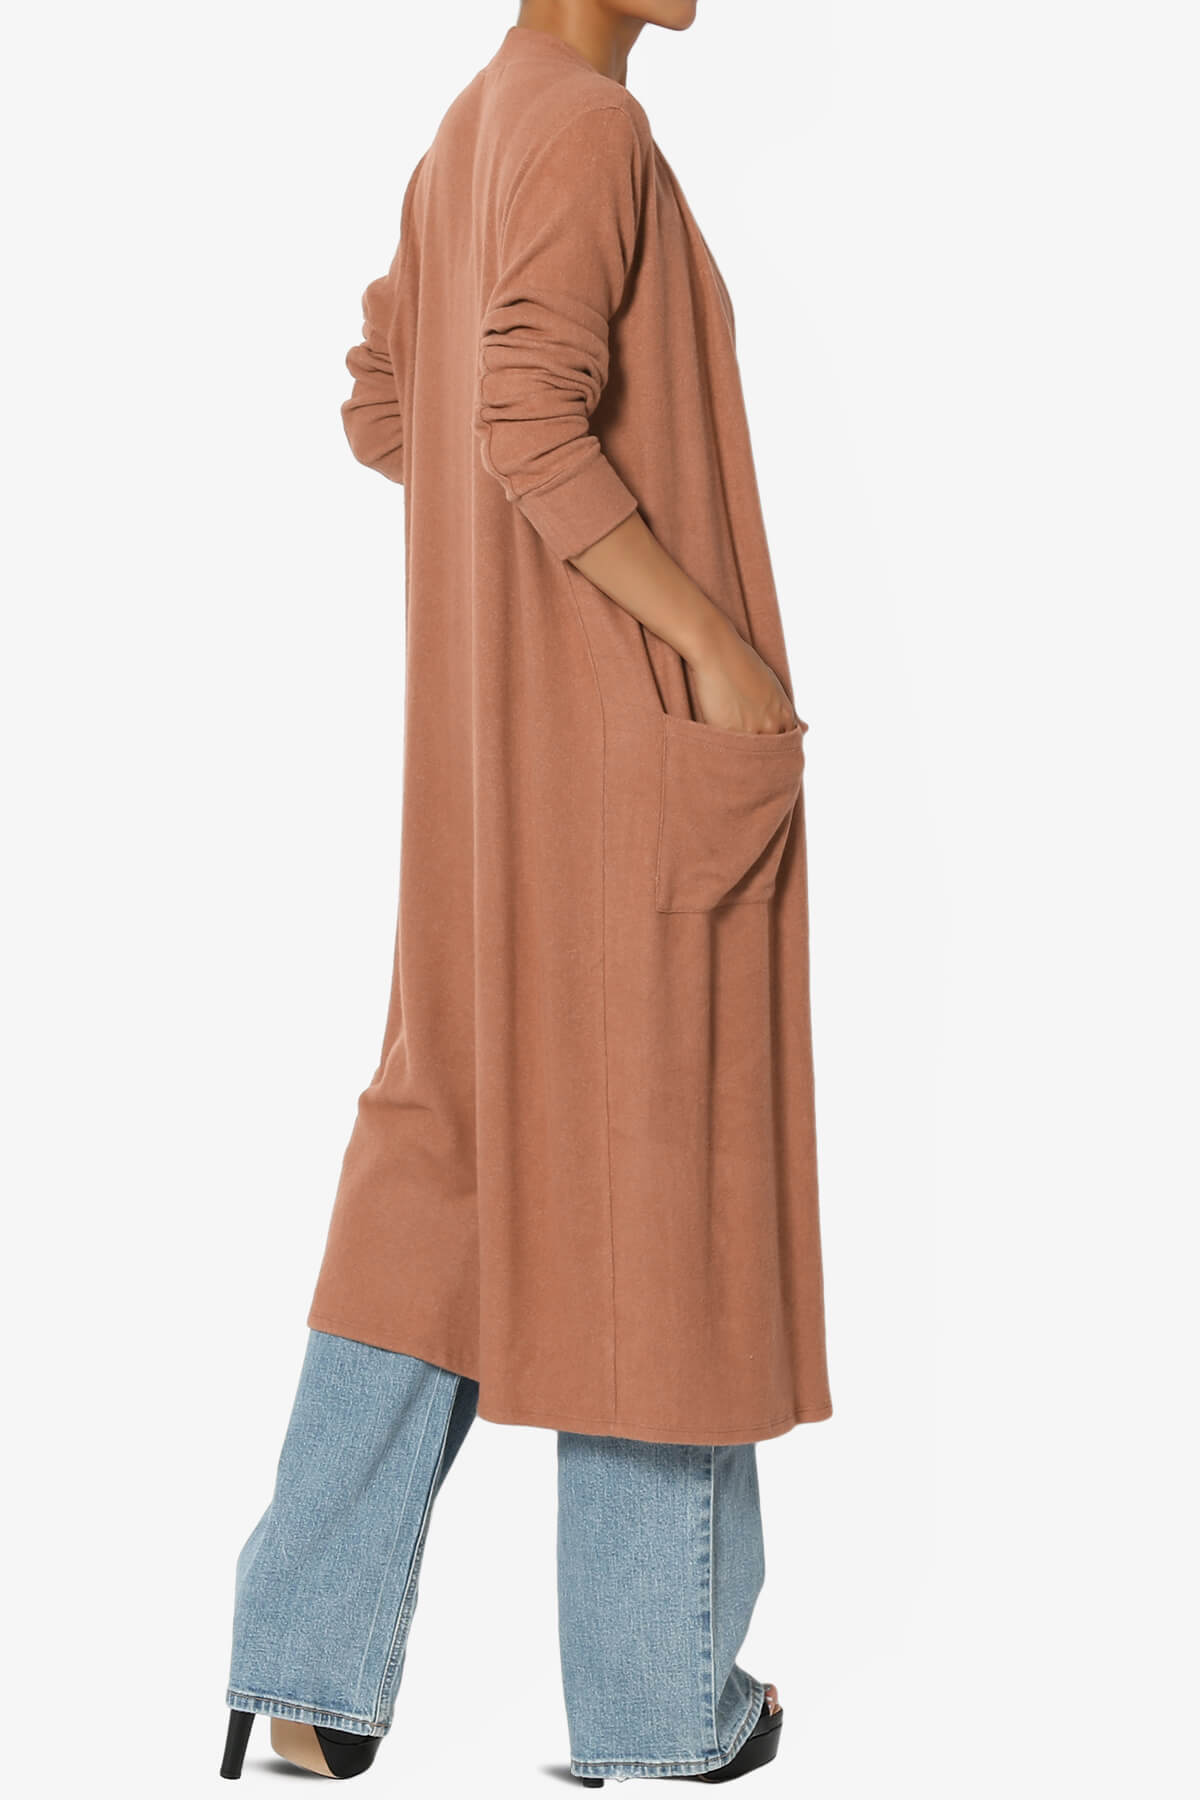 Noelle Extra Long Duster Knit Cardigan CAMEL_4